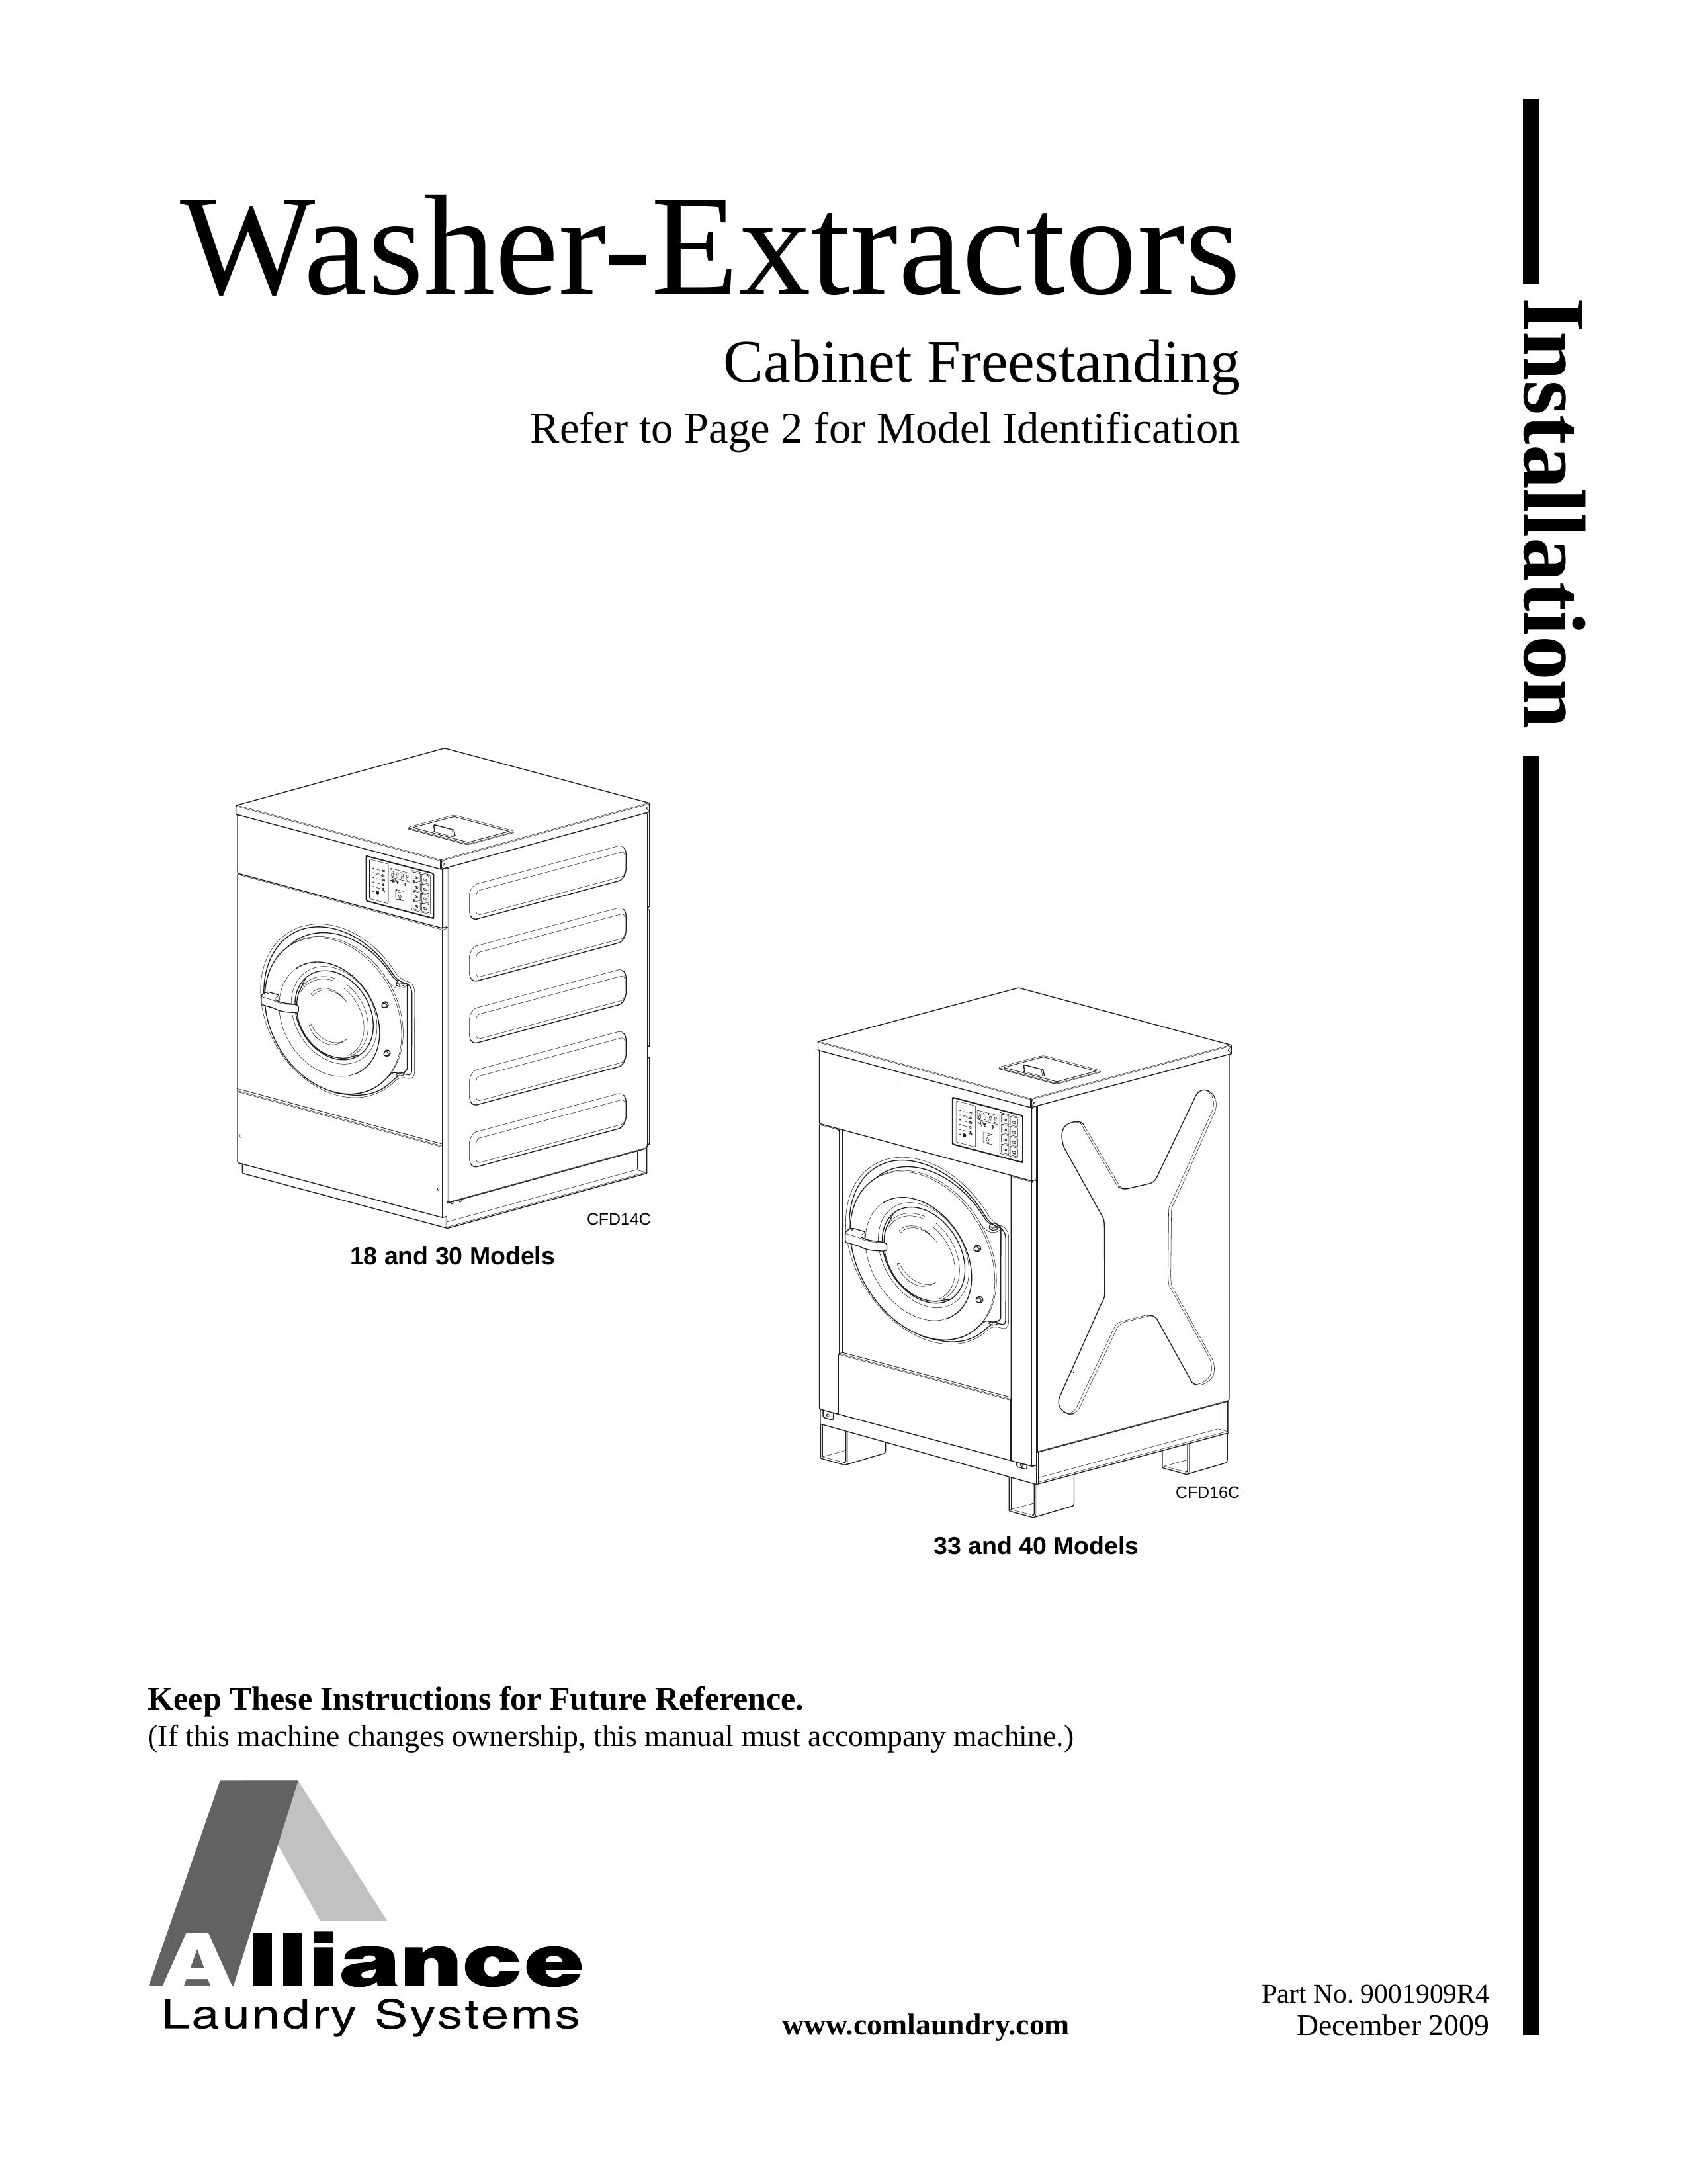 Alliance Laundry Systems CFD16C Washer User Manual